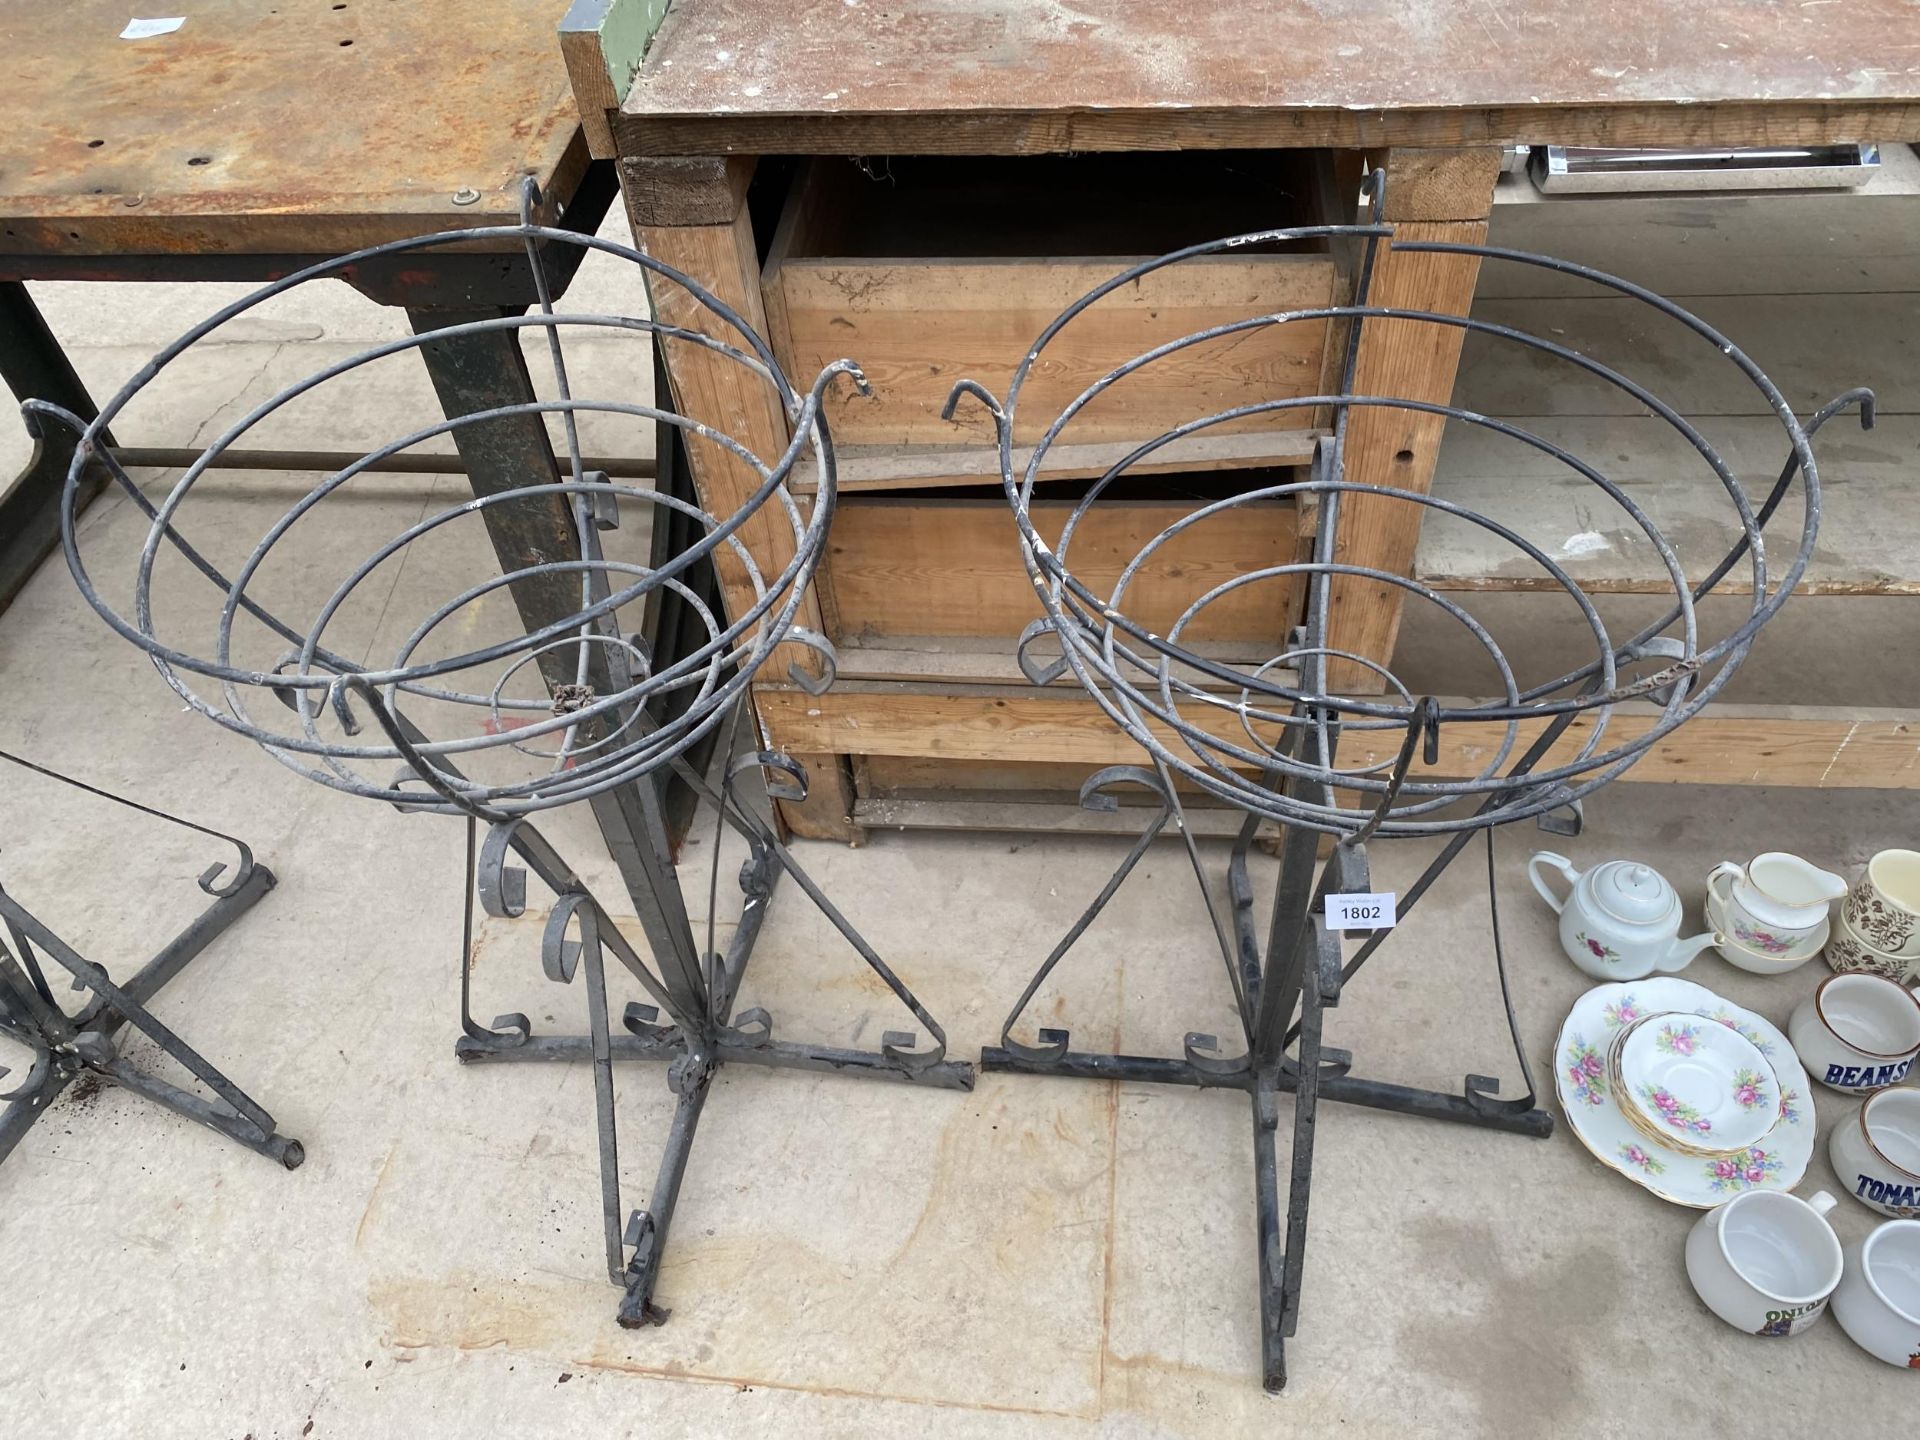 A PAIR OF WROUGHT IRON BASKET PLANTERS (H:80CM)